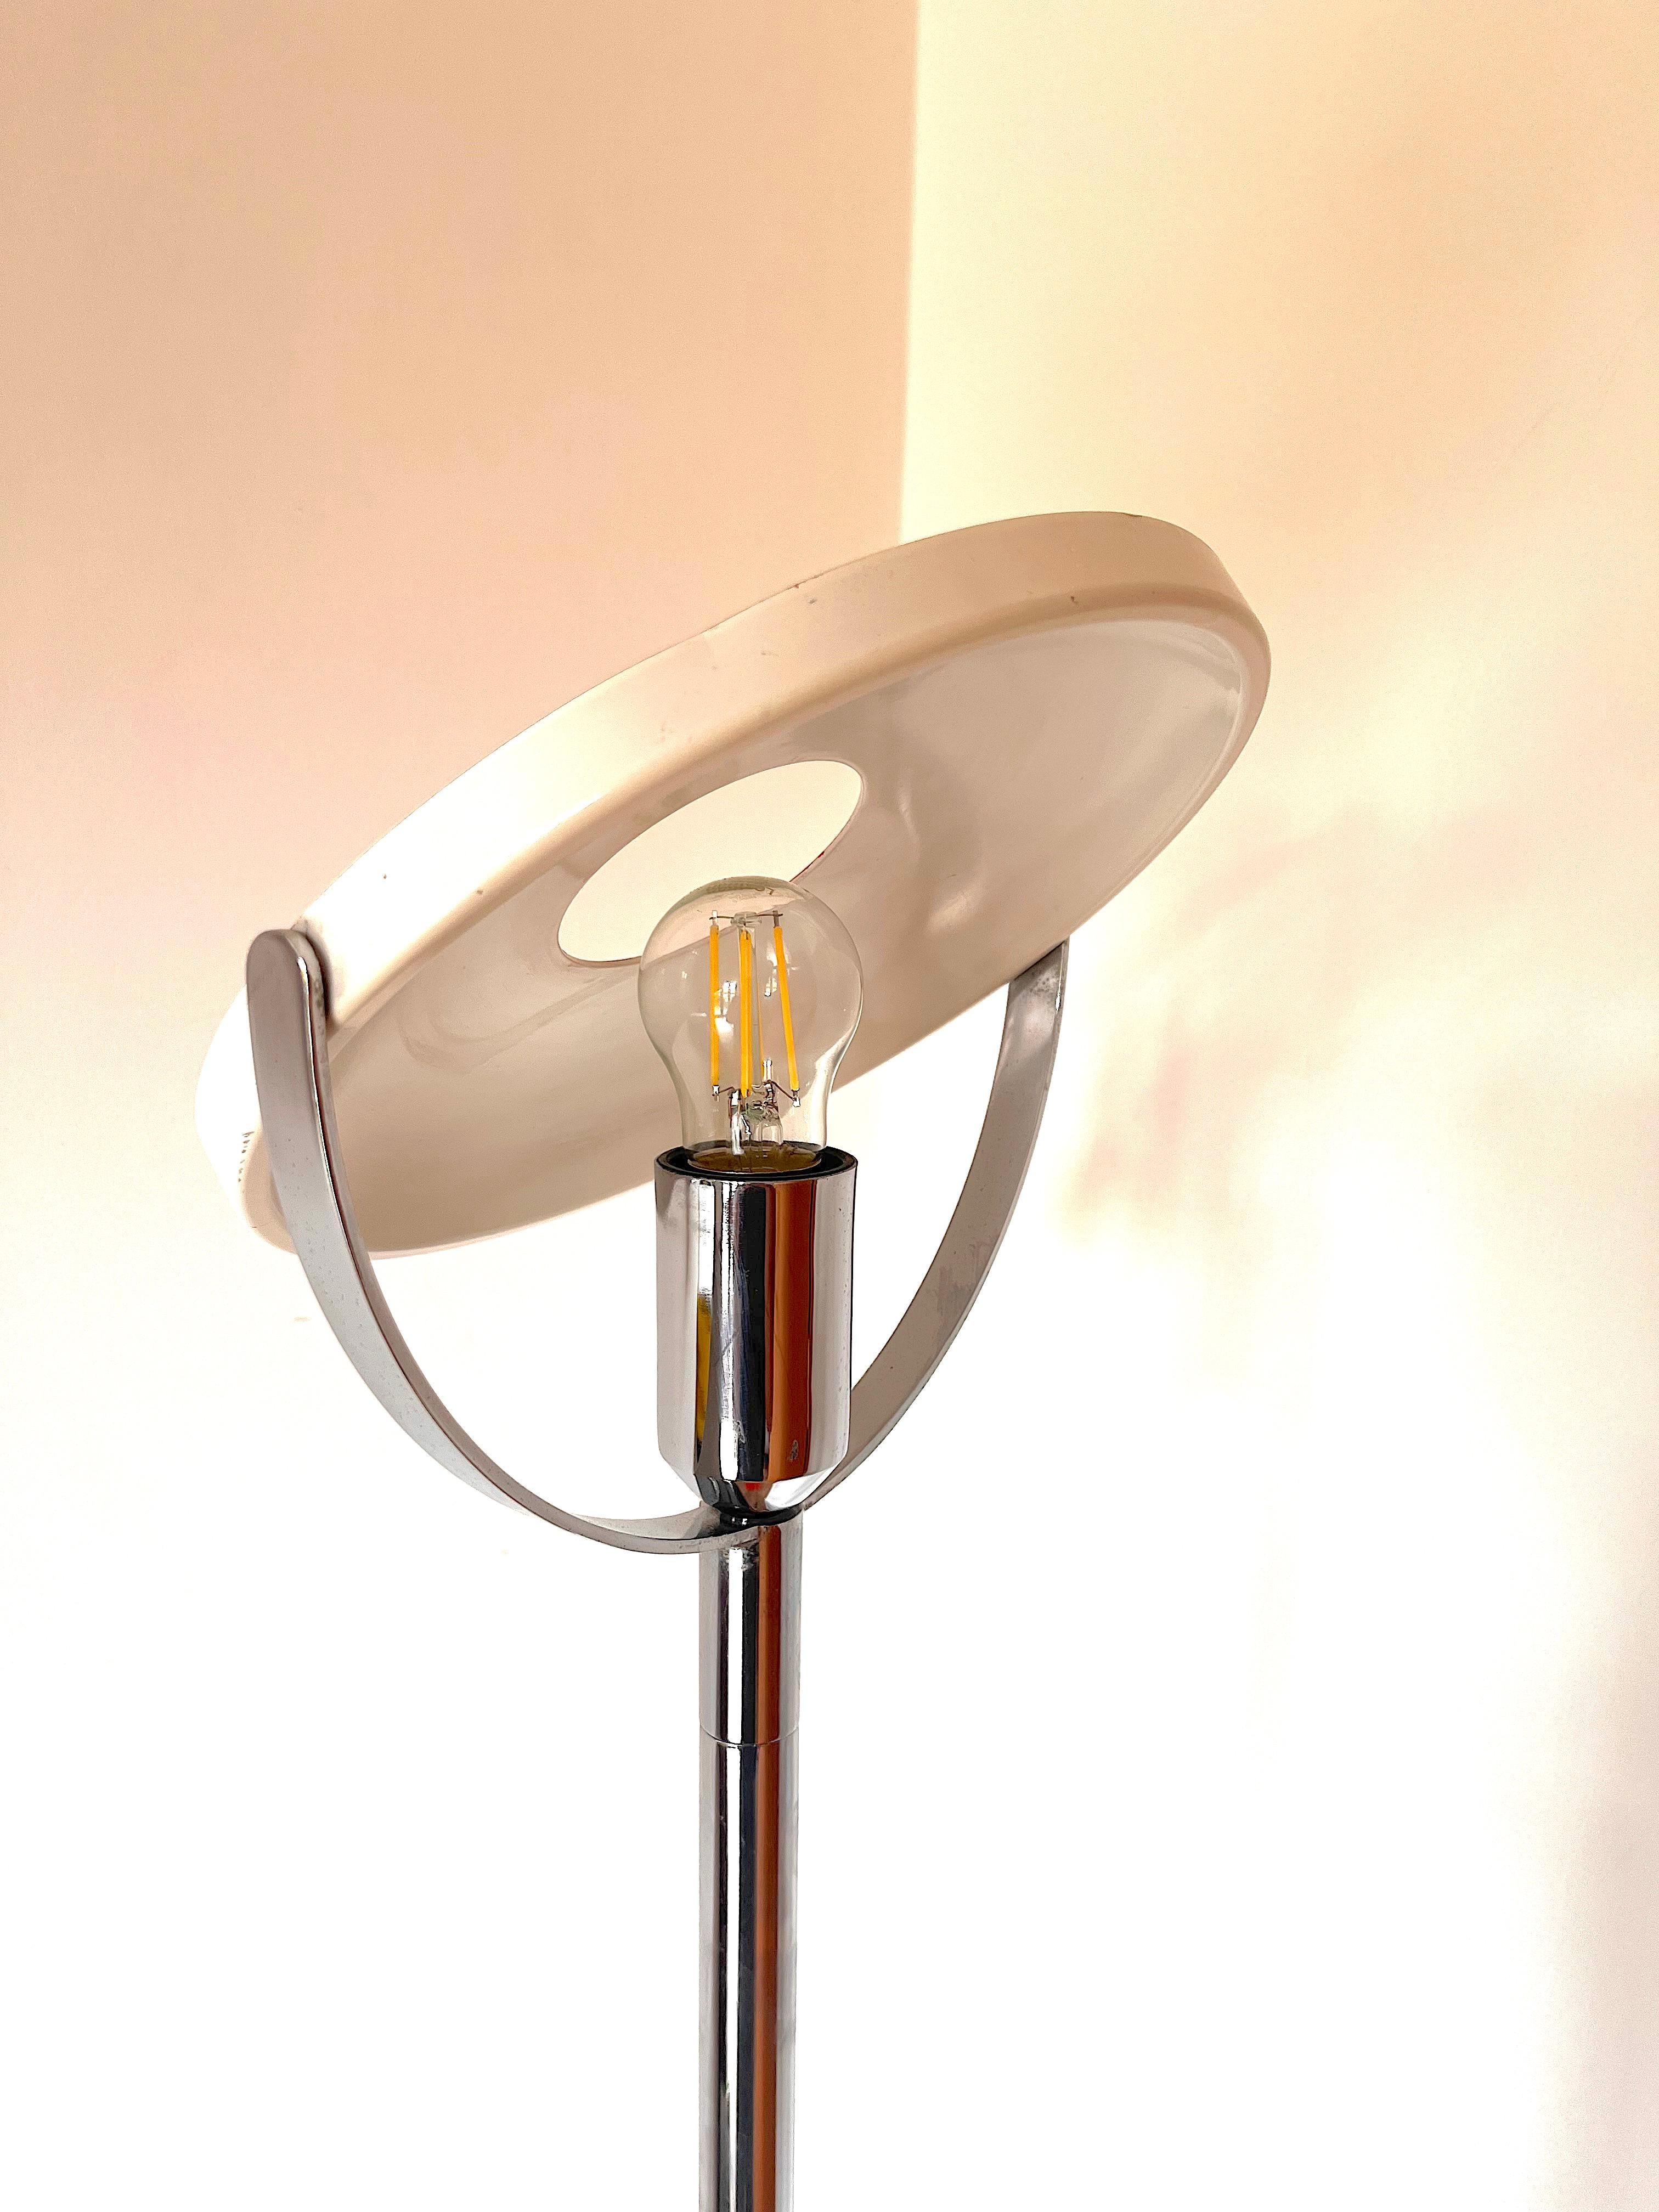 Bauhaus Floor Lamp by Carl Jakob Jucker for Imago Dp, Weimar In Good Condition For Sale In Roma, IT